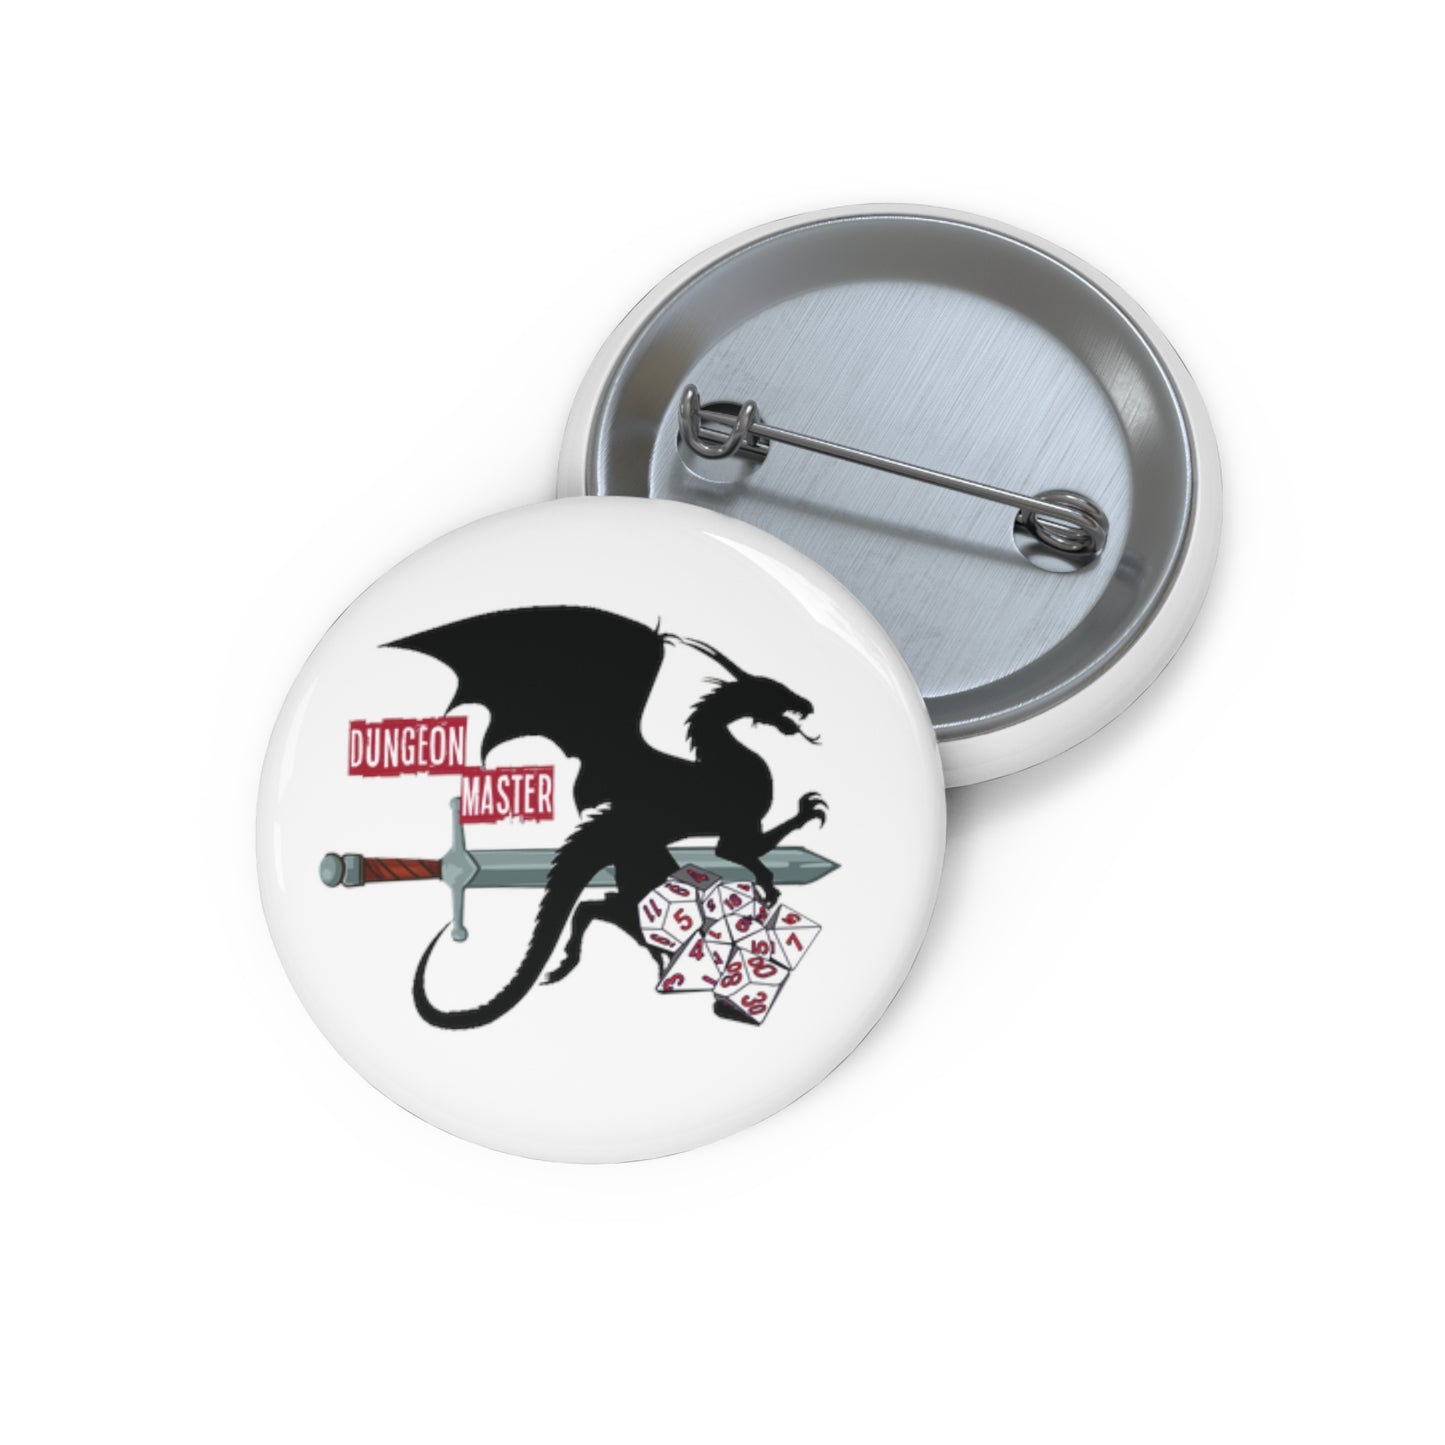 Dungeon Master -  Pin Buttons ( DM )